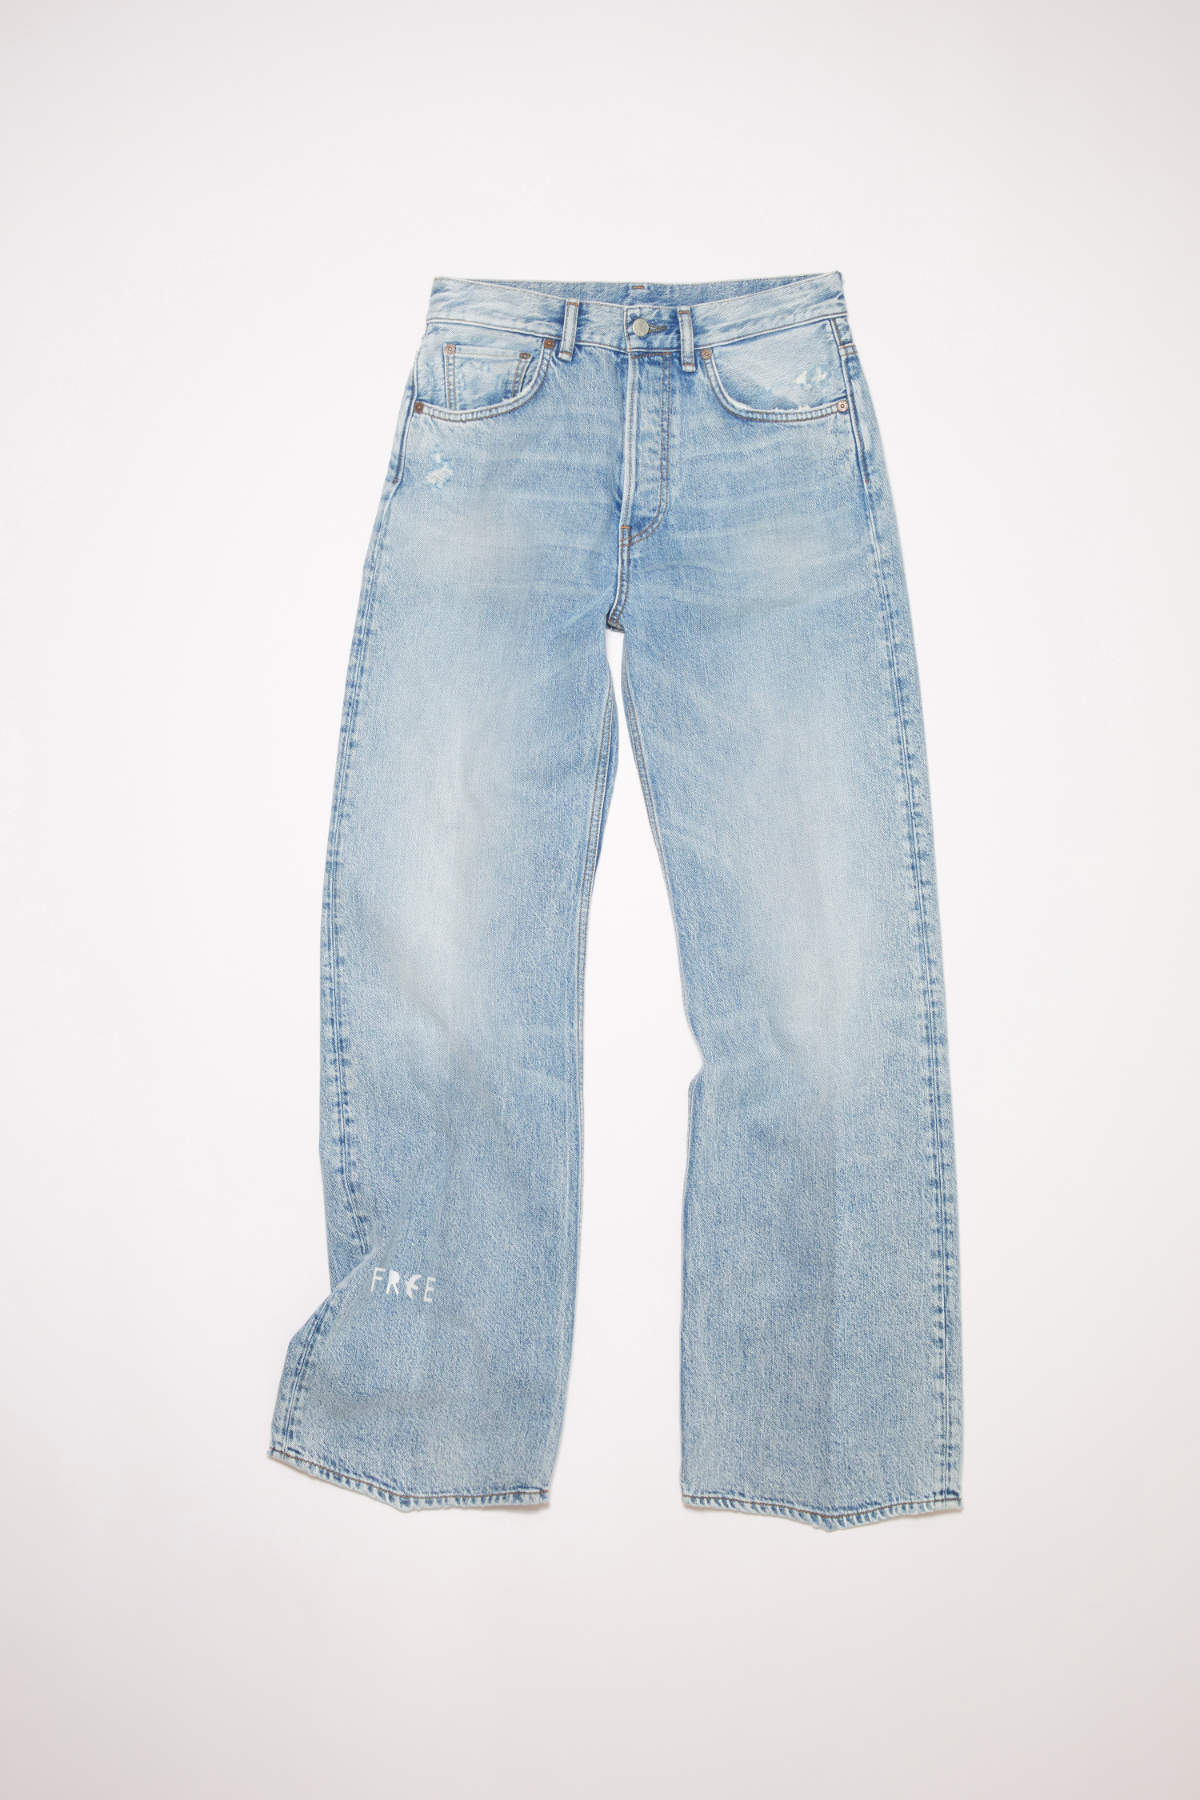 Acne Studios Introduces New Personalisation Service For Denim